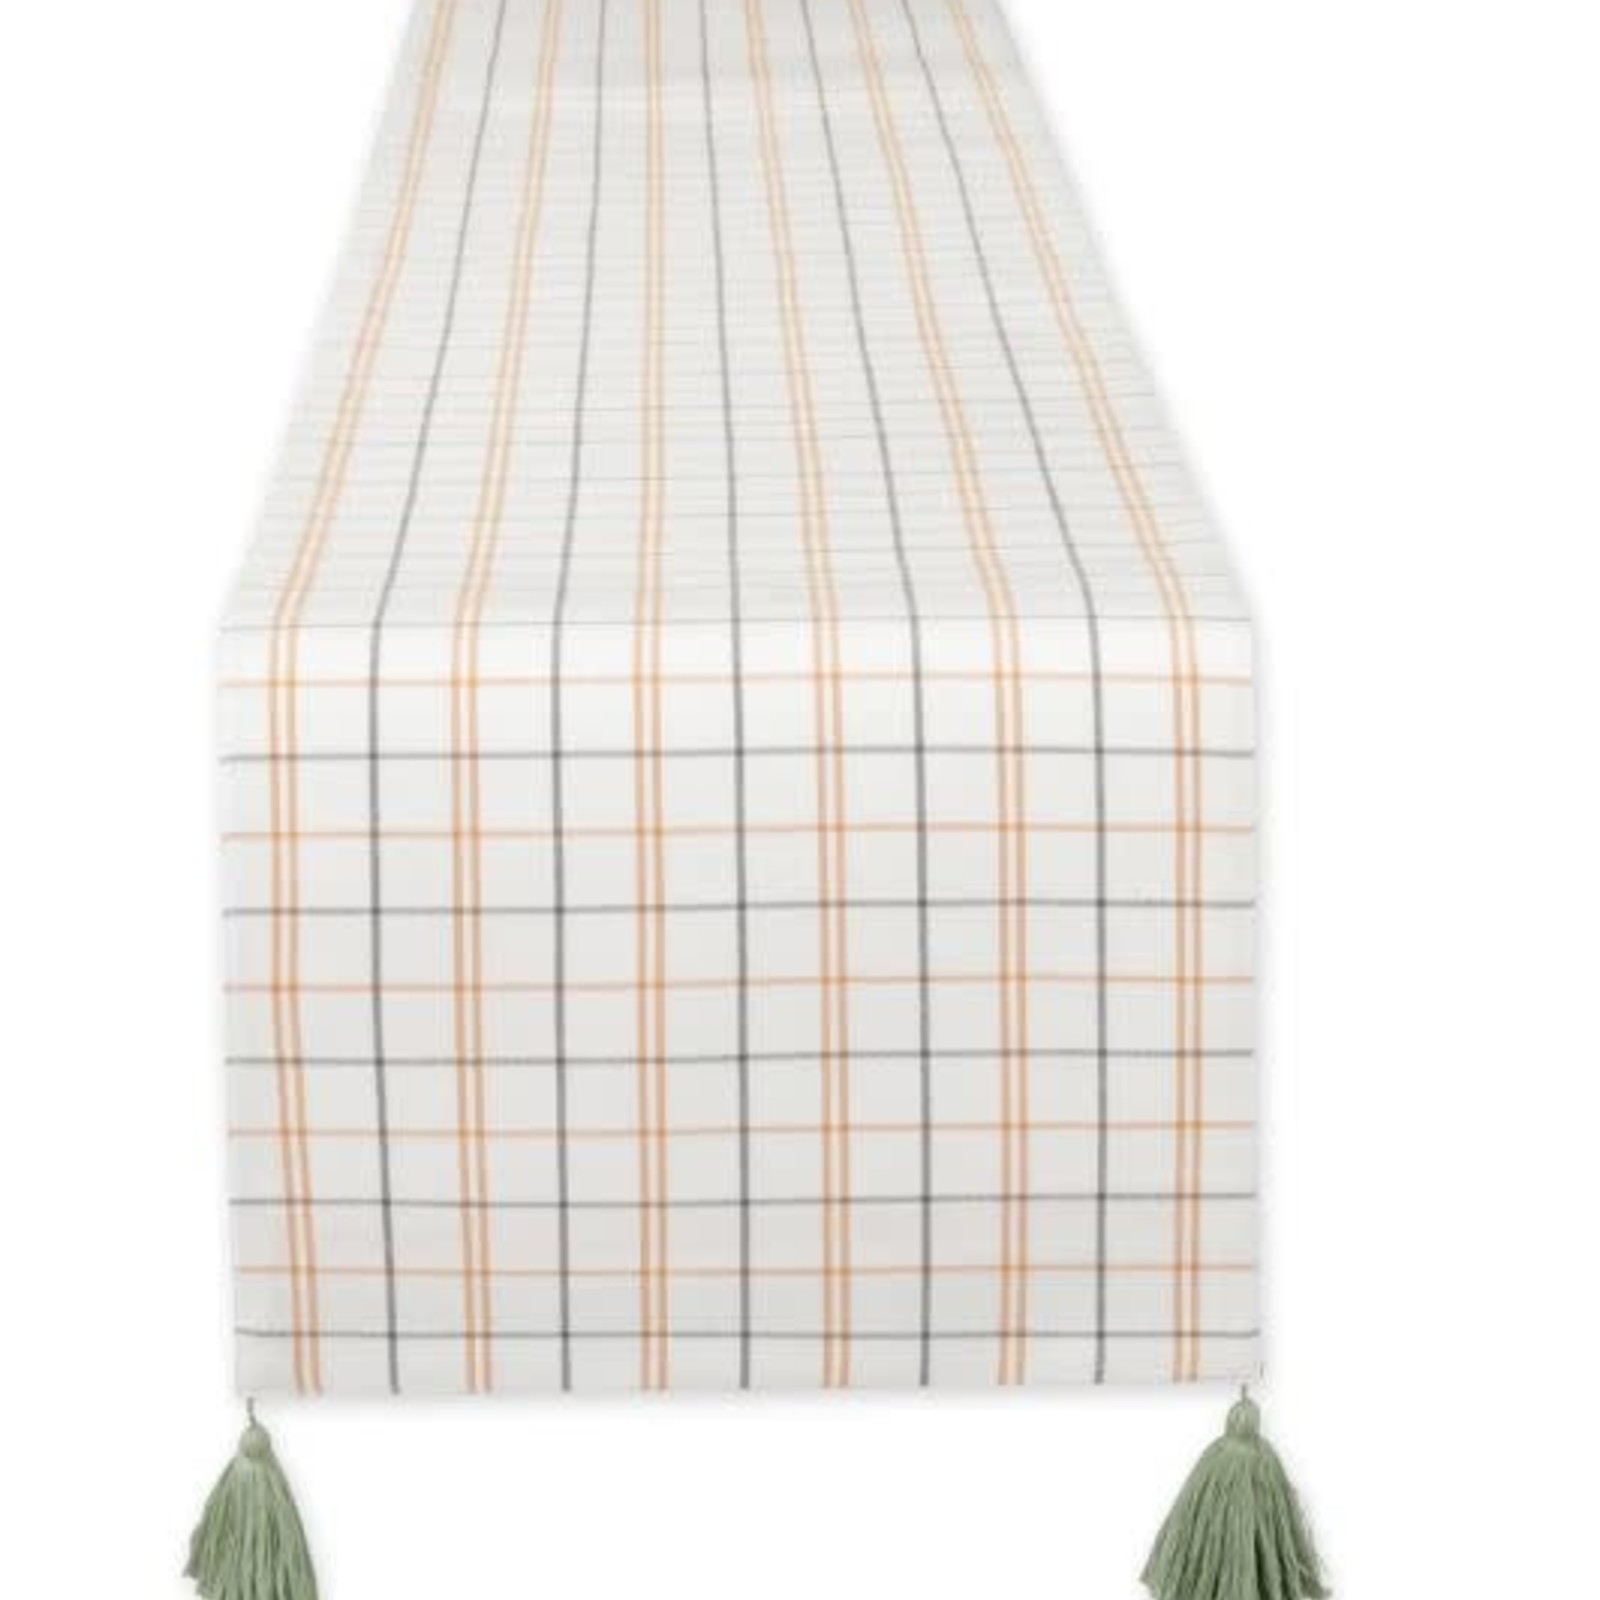 Design Imports DII Gather Fall Gingham Table Runner loading=